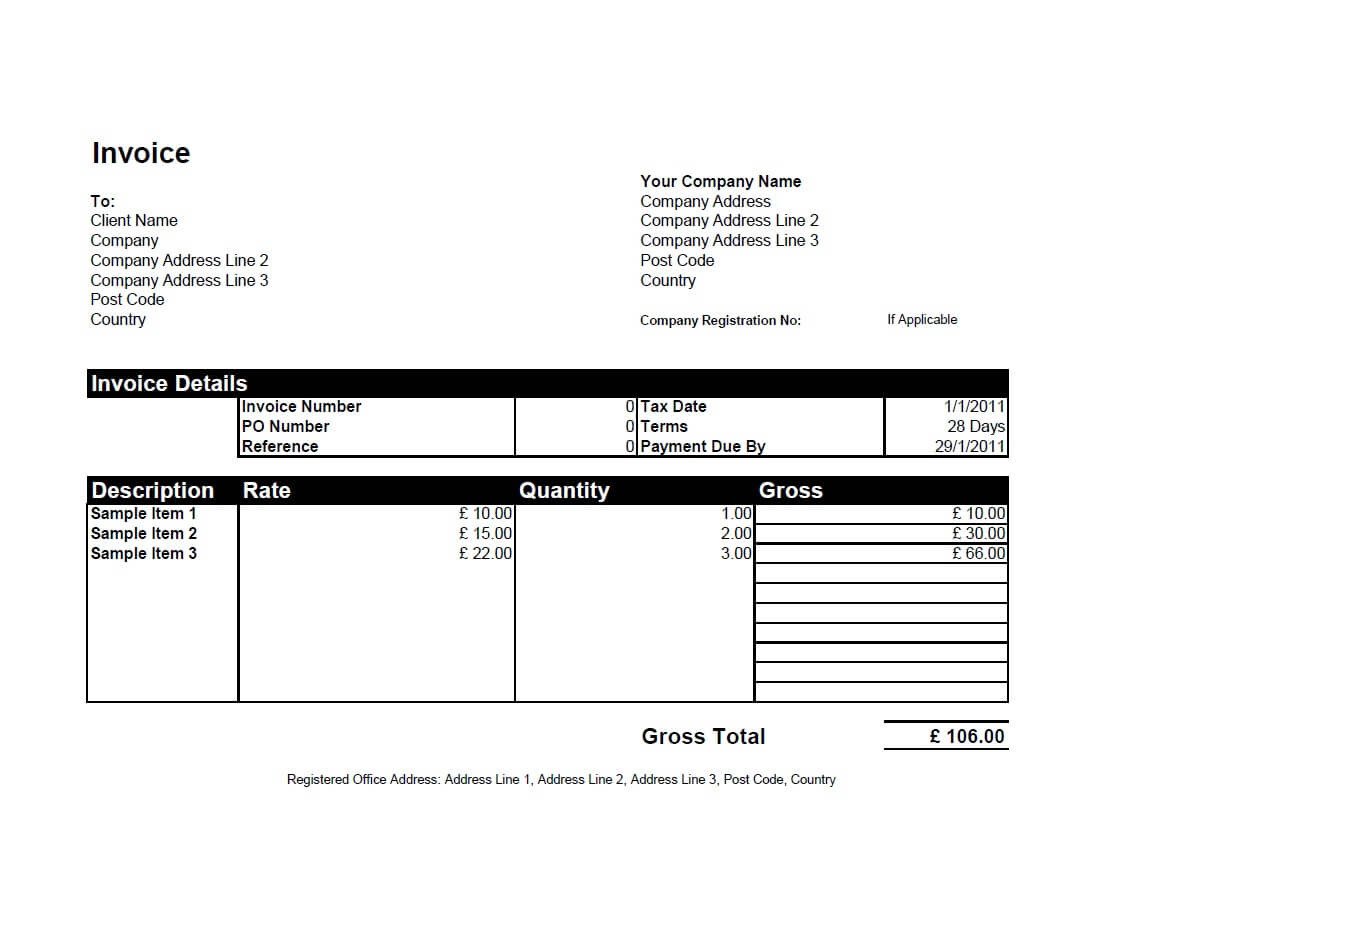 Free Invoice Template Pdf Free Invoice Templates for Word Excel Open Fice